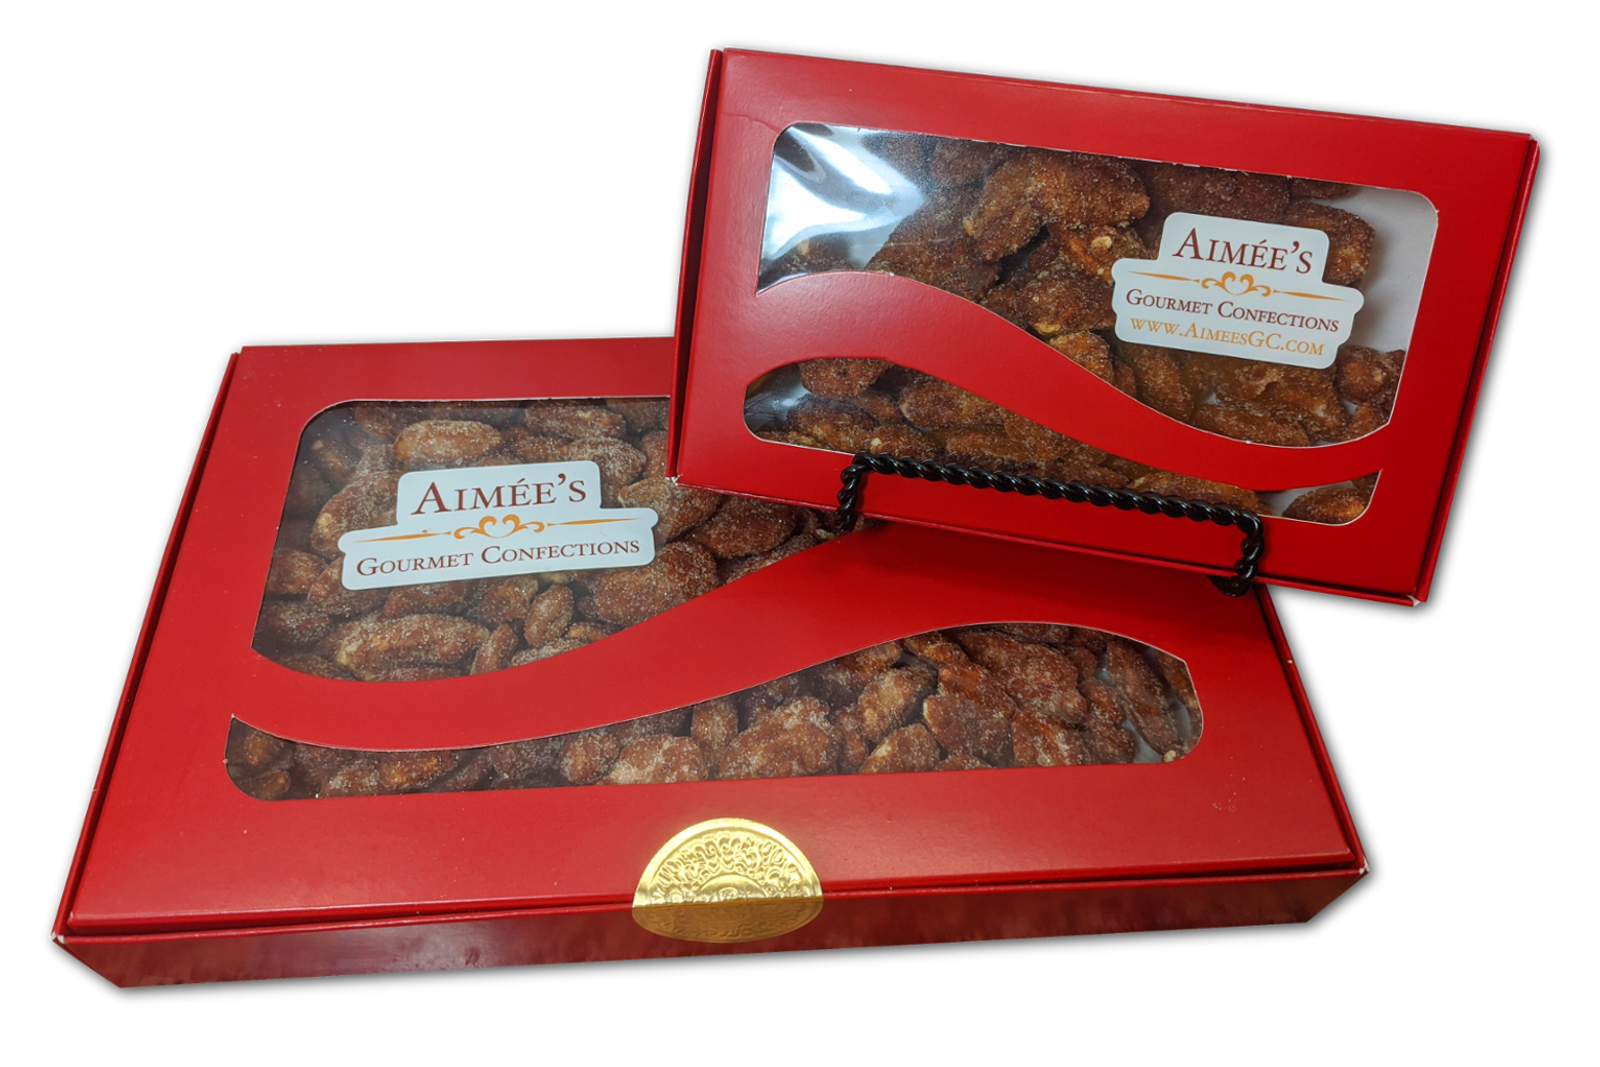 My Beloved Candied Pralines by Aimee's Gourmet Confections